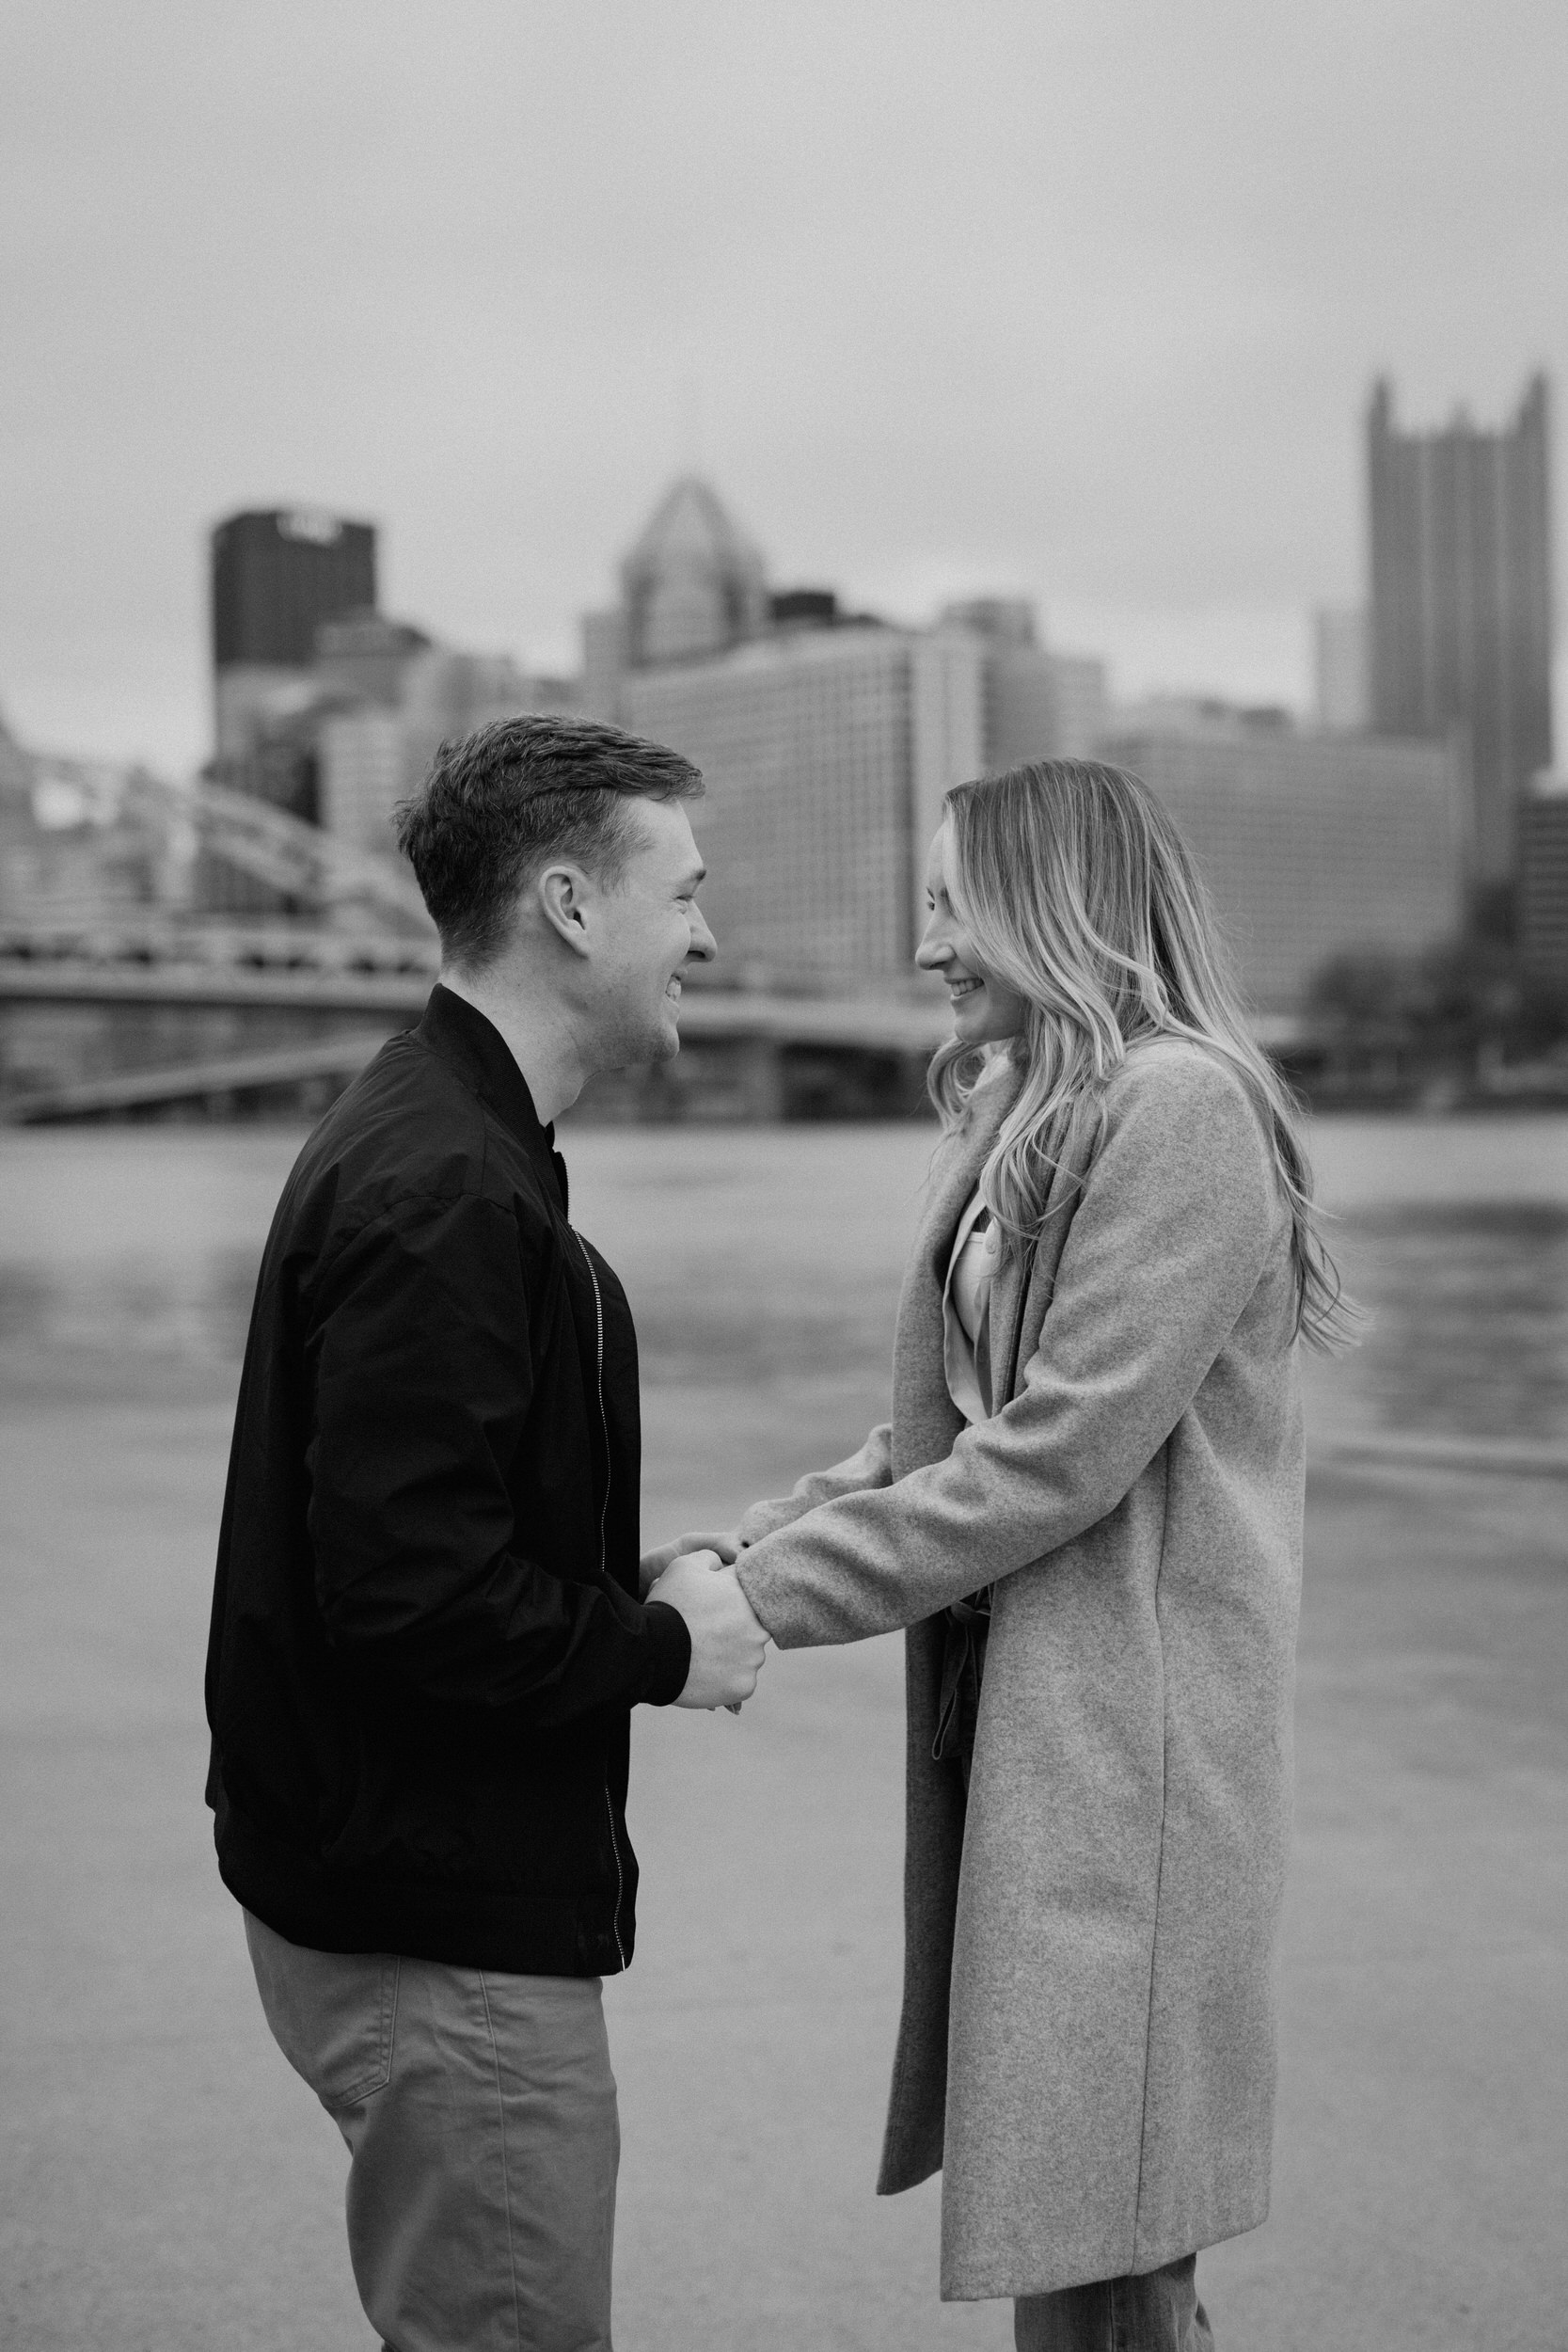 Getting engaged in the city of pittsburgh